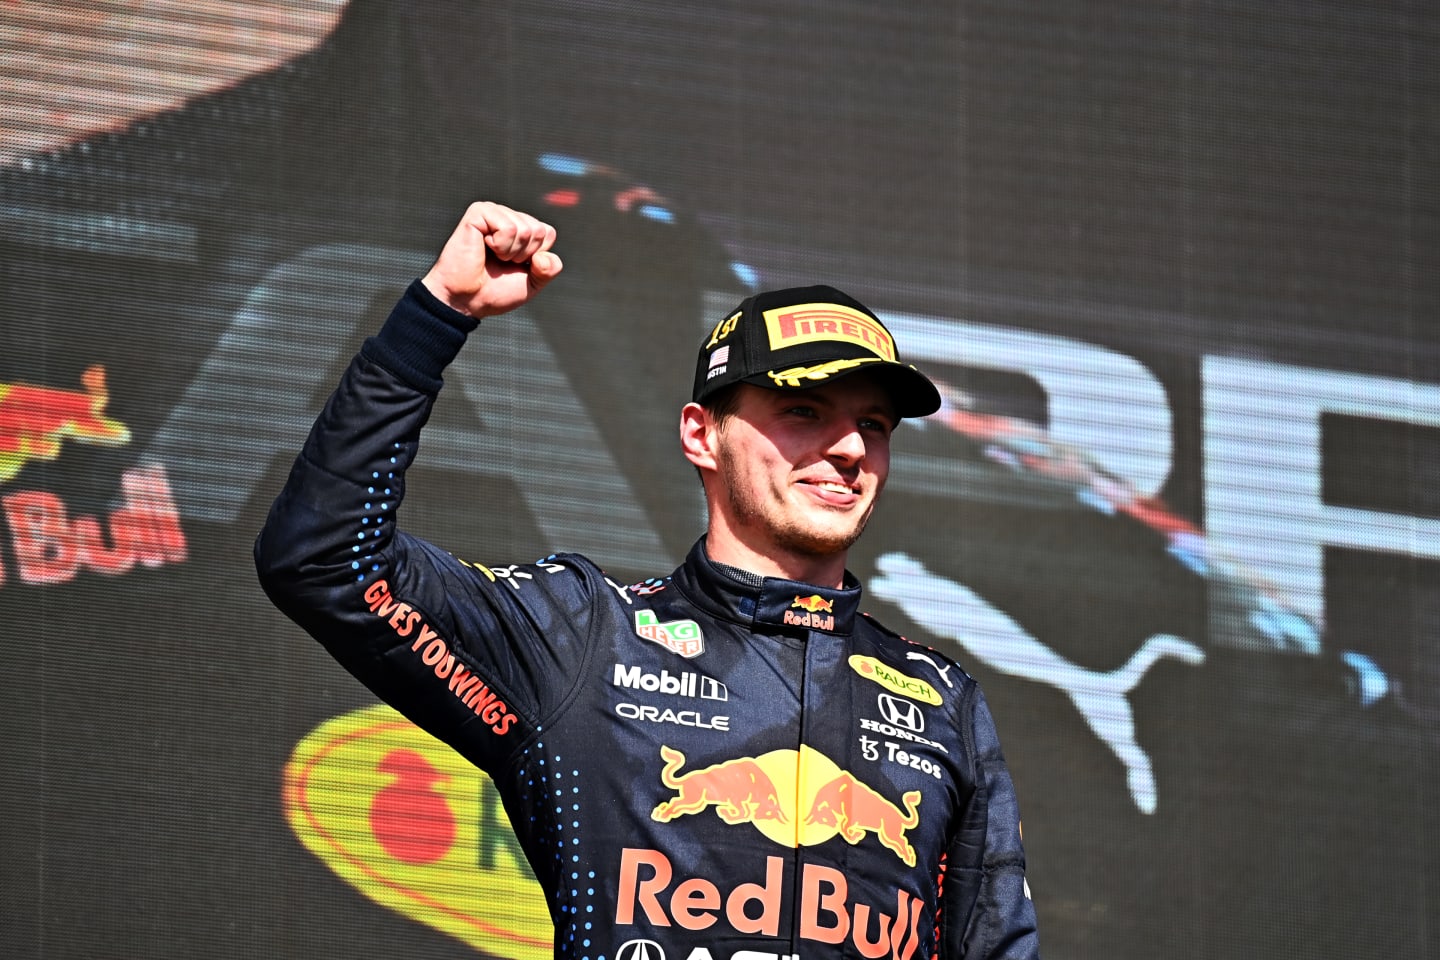 AUSTIN, TEXAS - OCTOBER 24: Race winner Max Verstappen of Netherlands and Red Bull Racing celebrates on the podium during the F1 Grand Prix of USA at Circuit of The Americas on October 24, 2021 in Austin, Texas. (Photo by Clive Mason - Formula 1/Formula 1 via Getty Images)